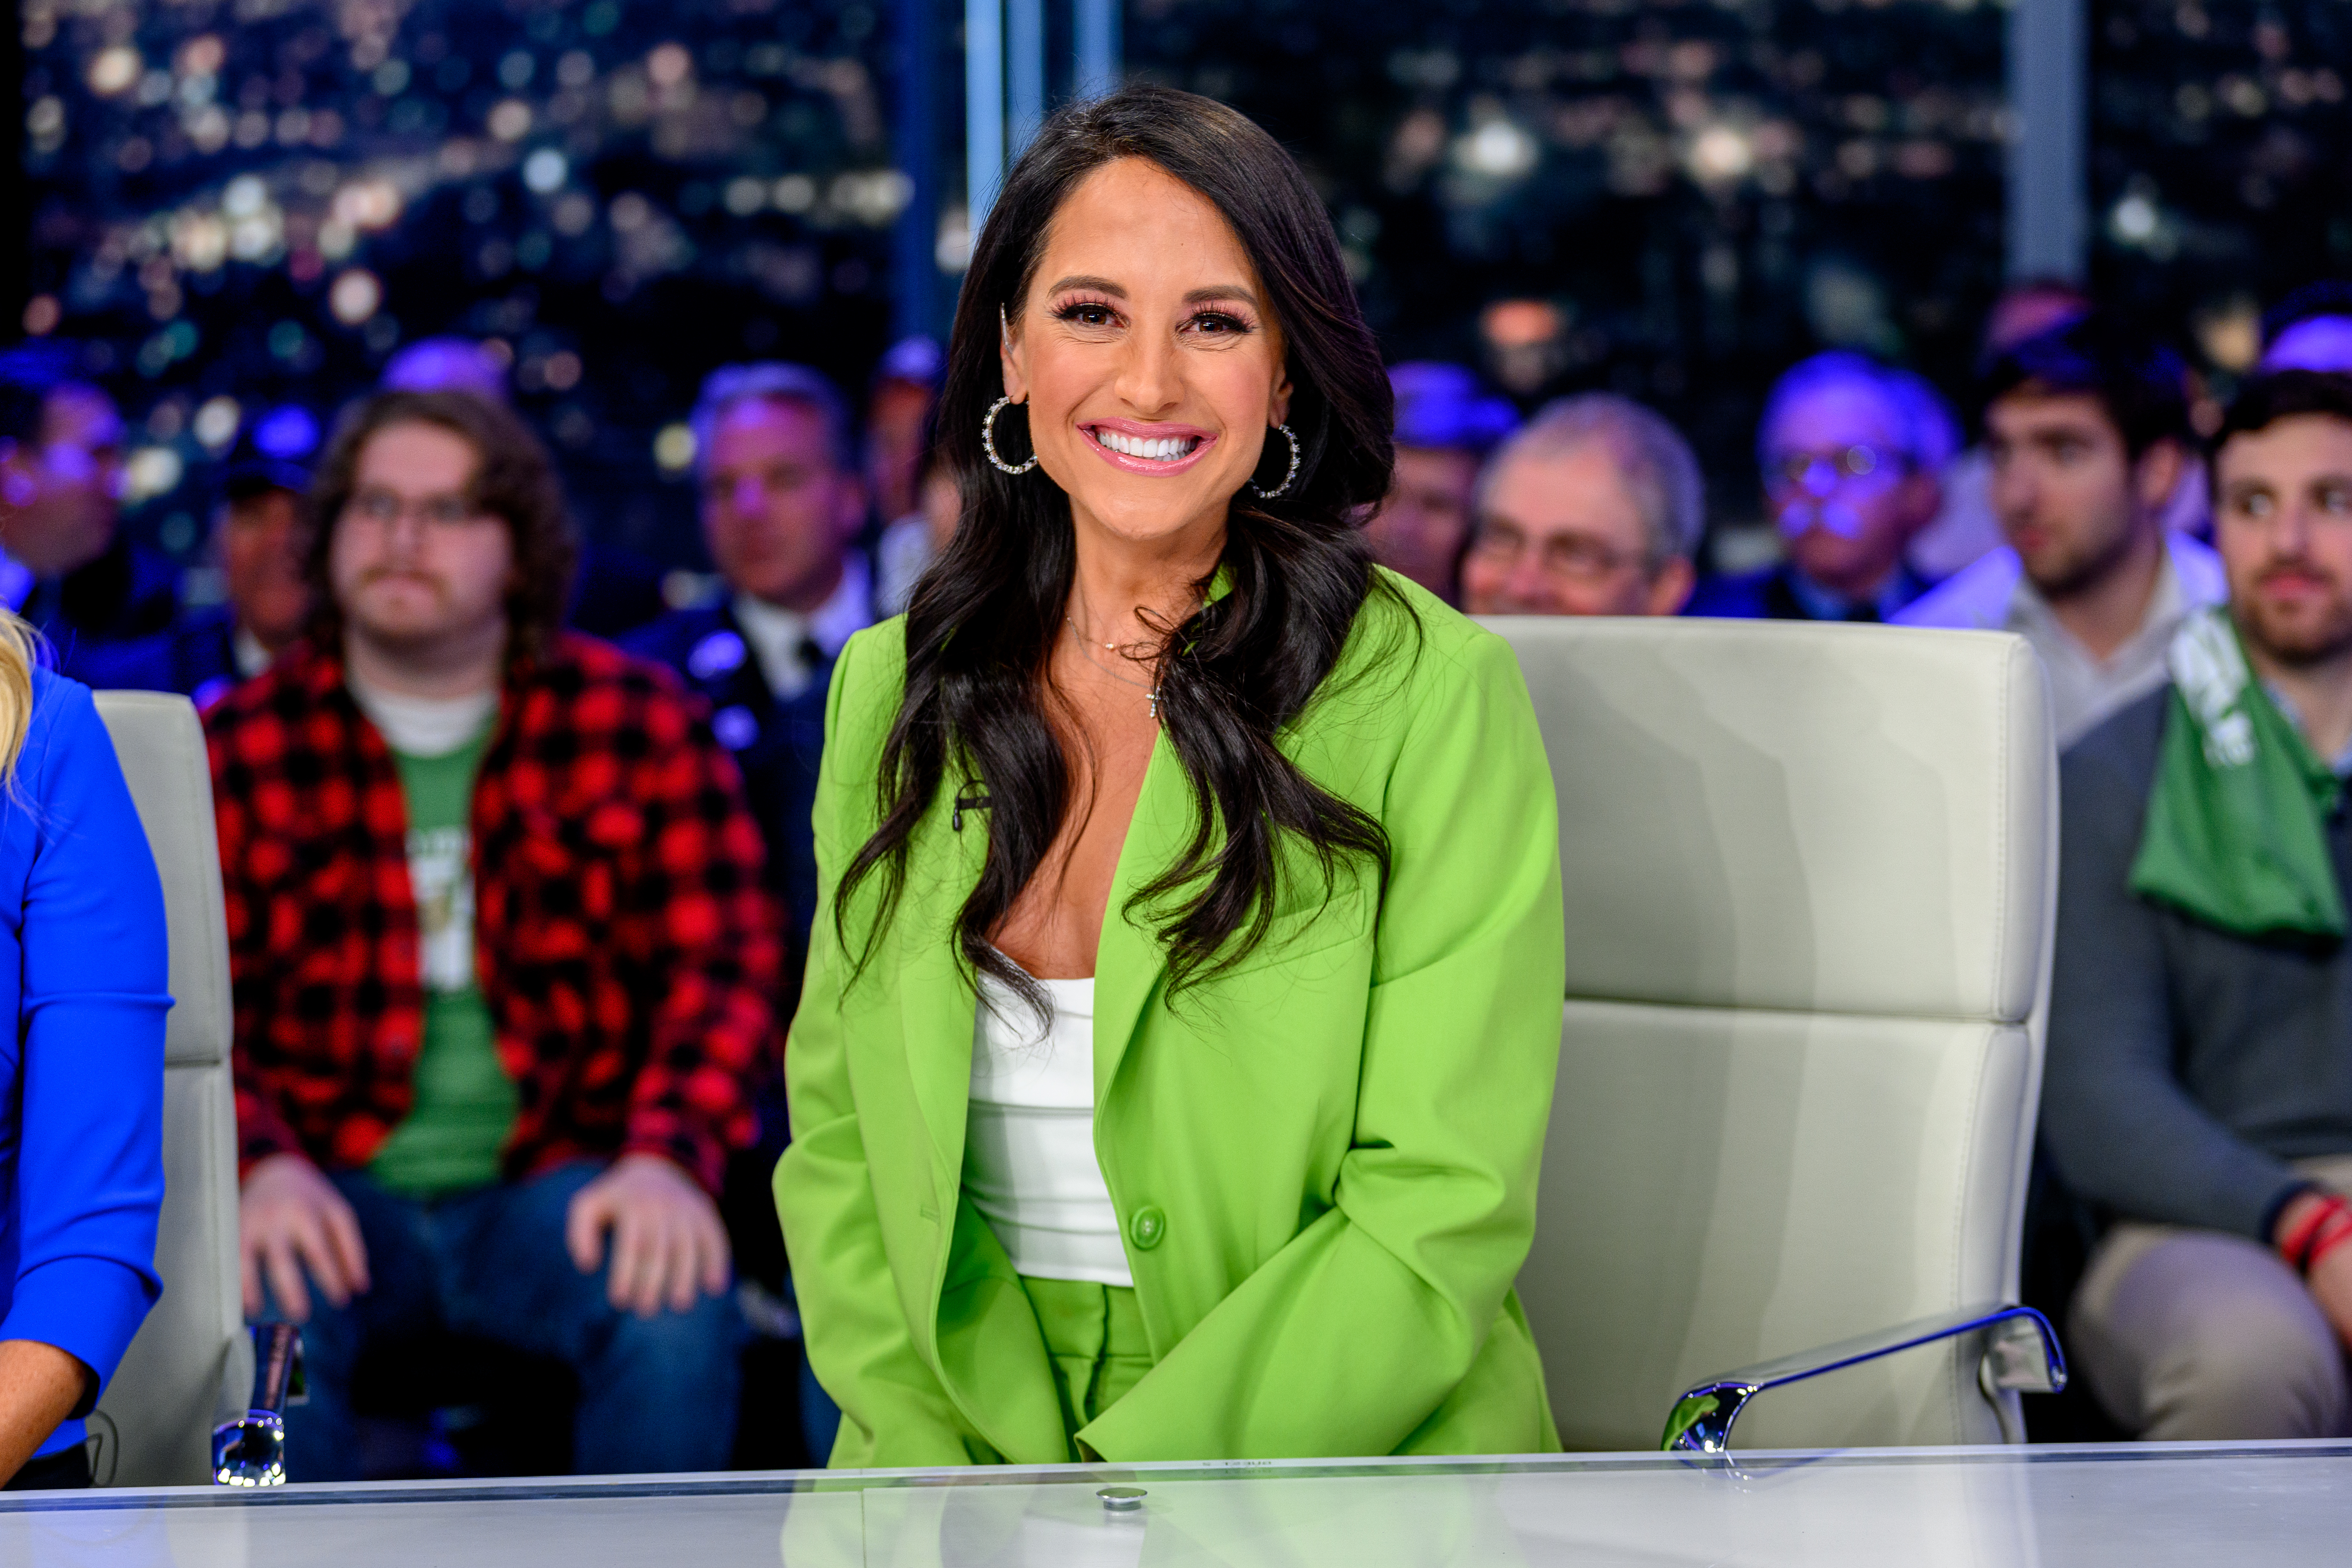 Emily Compagno is pictured during her visit on "Hannity" with host Sean Hannity at Fox News Channel Studios on March 15, 2023, in New York City | Source: Getty Images